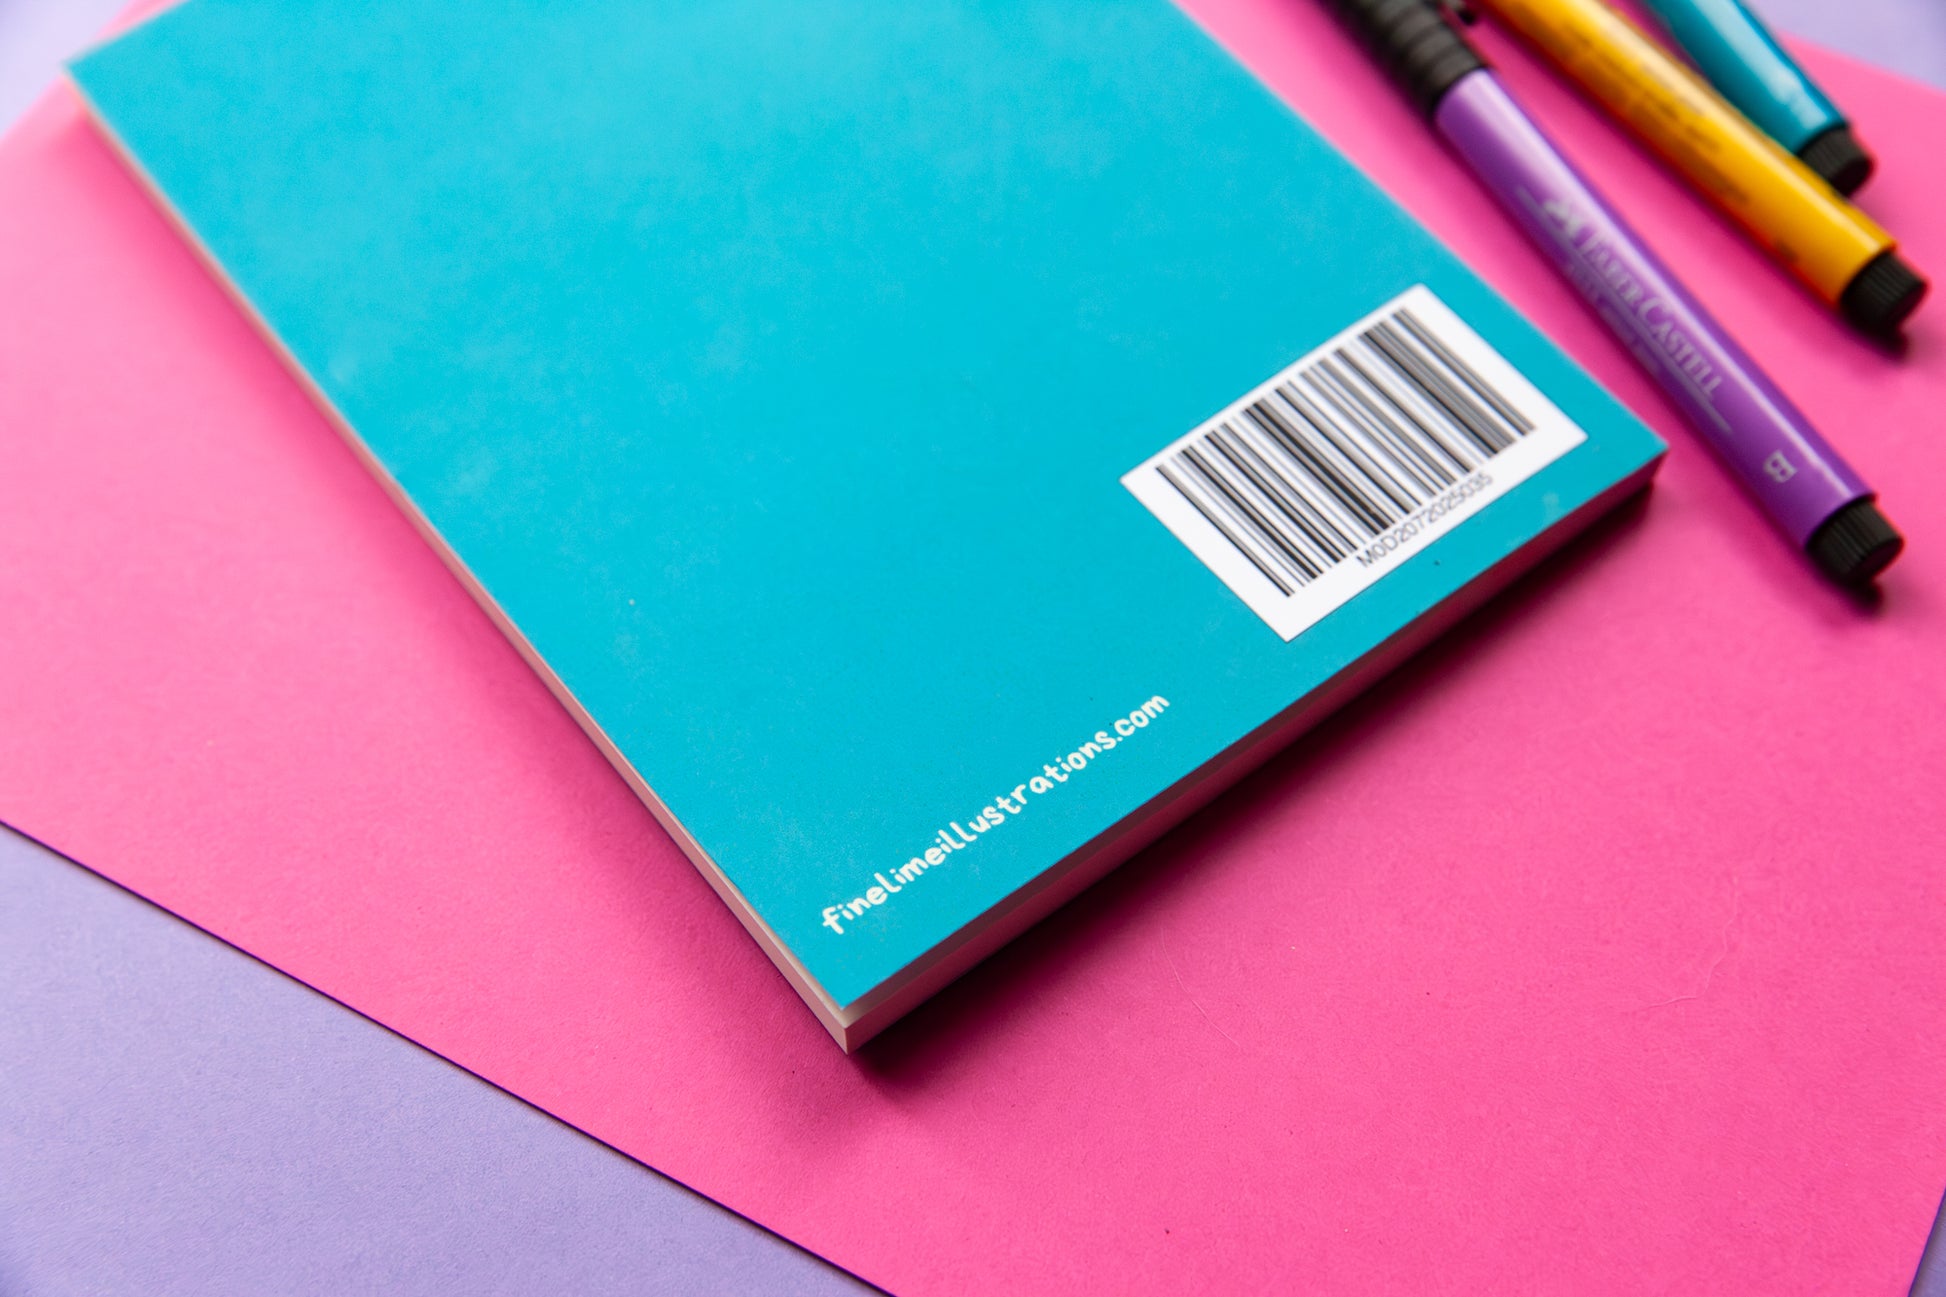 The back cover of a teal notebook showing a bar code and the company website